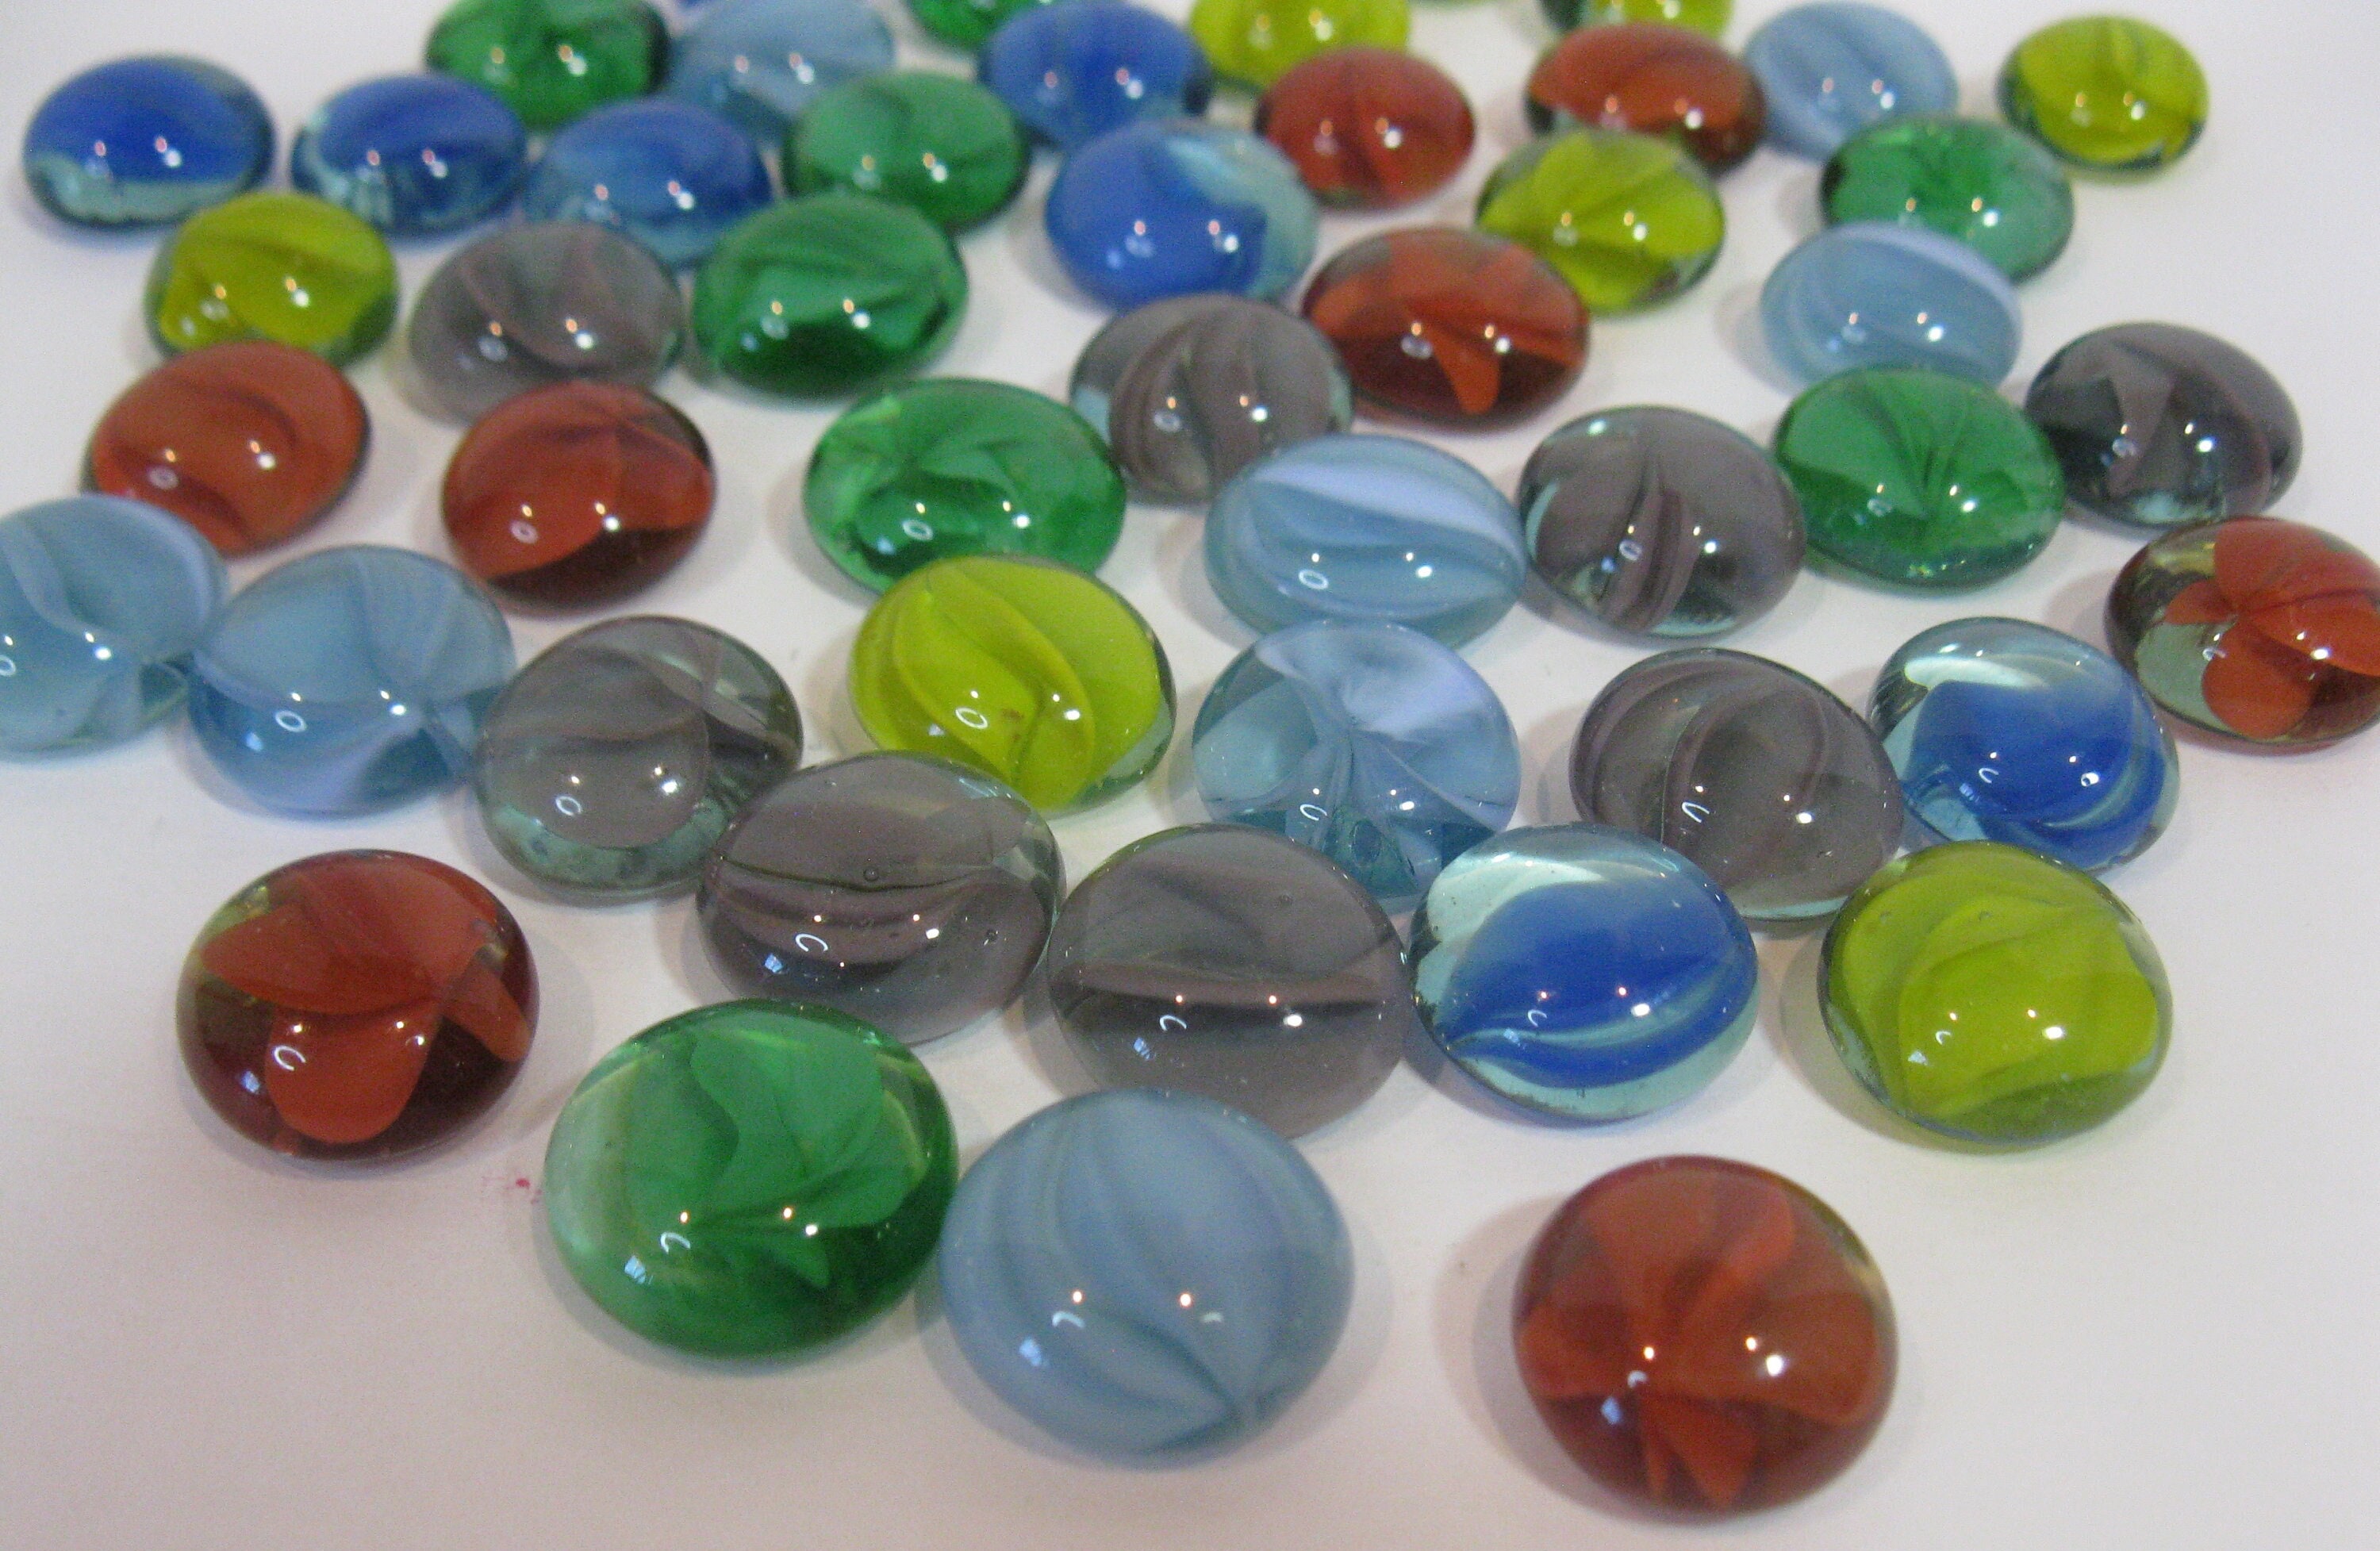 Lot of marbles and mancala glass stones 2.5 pounds various sizes